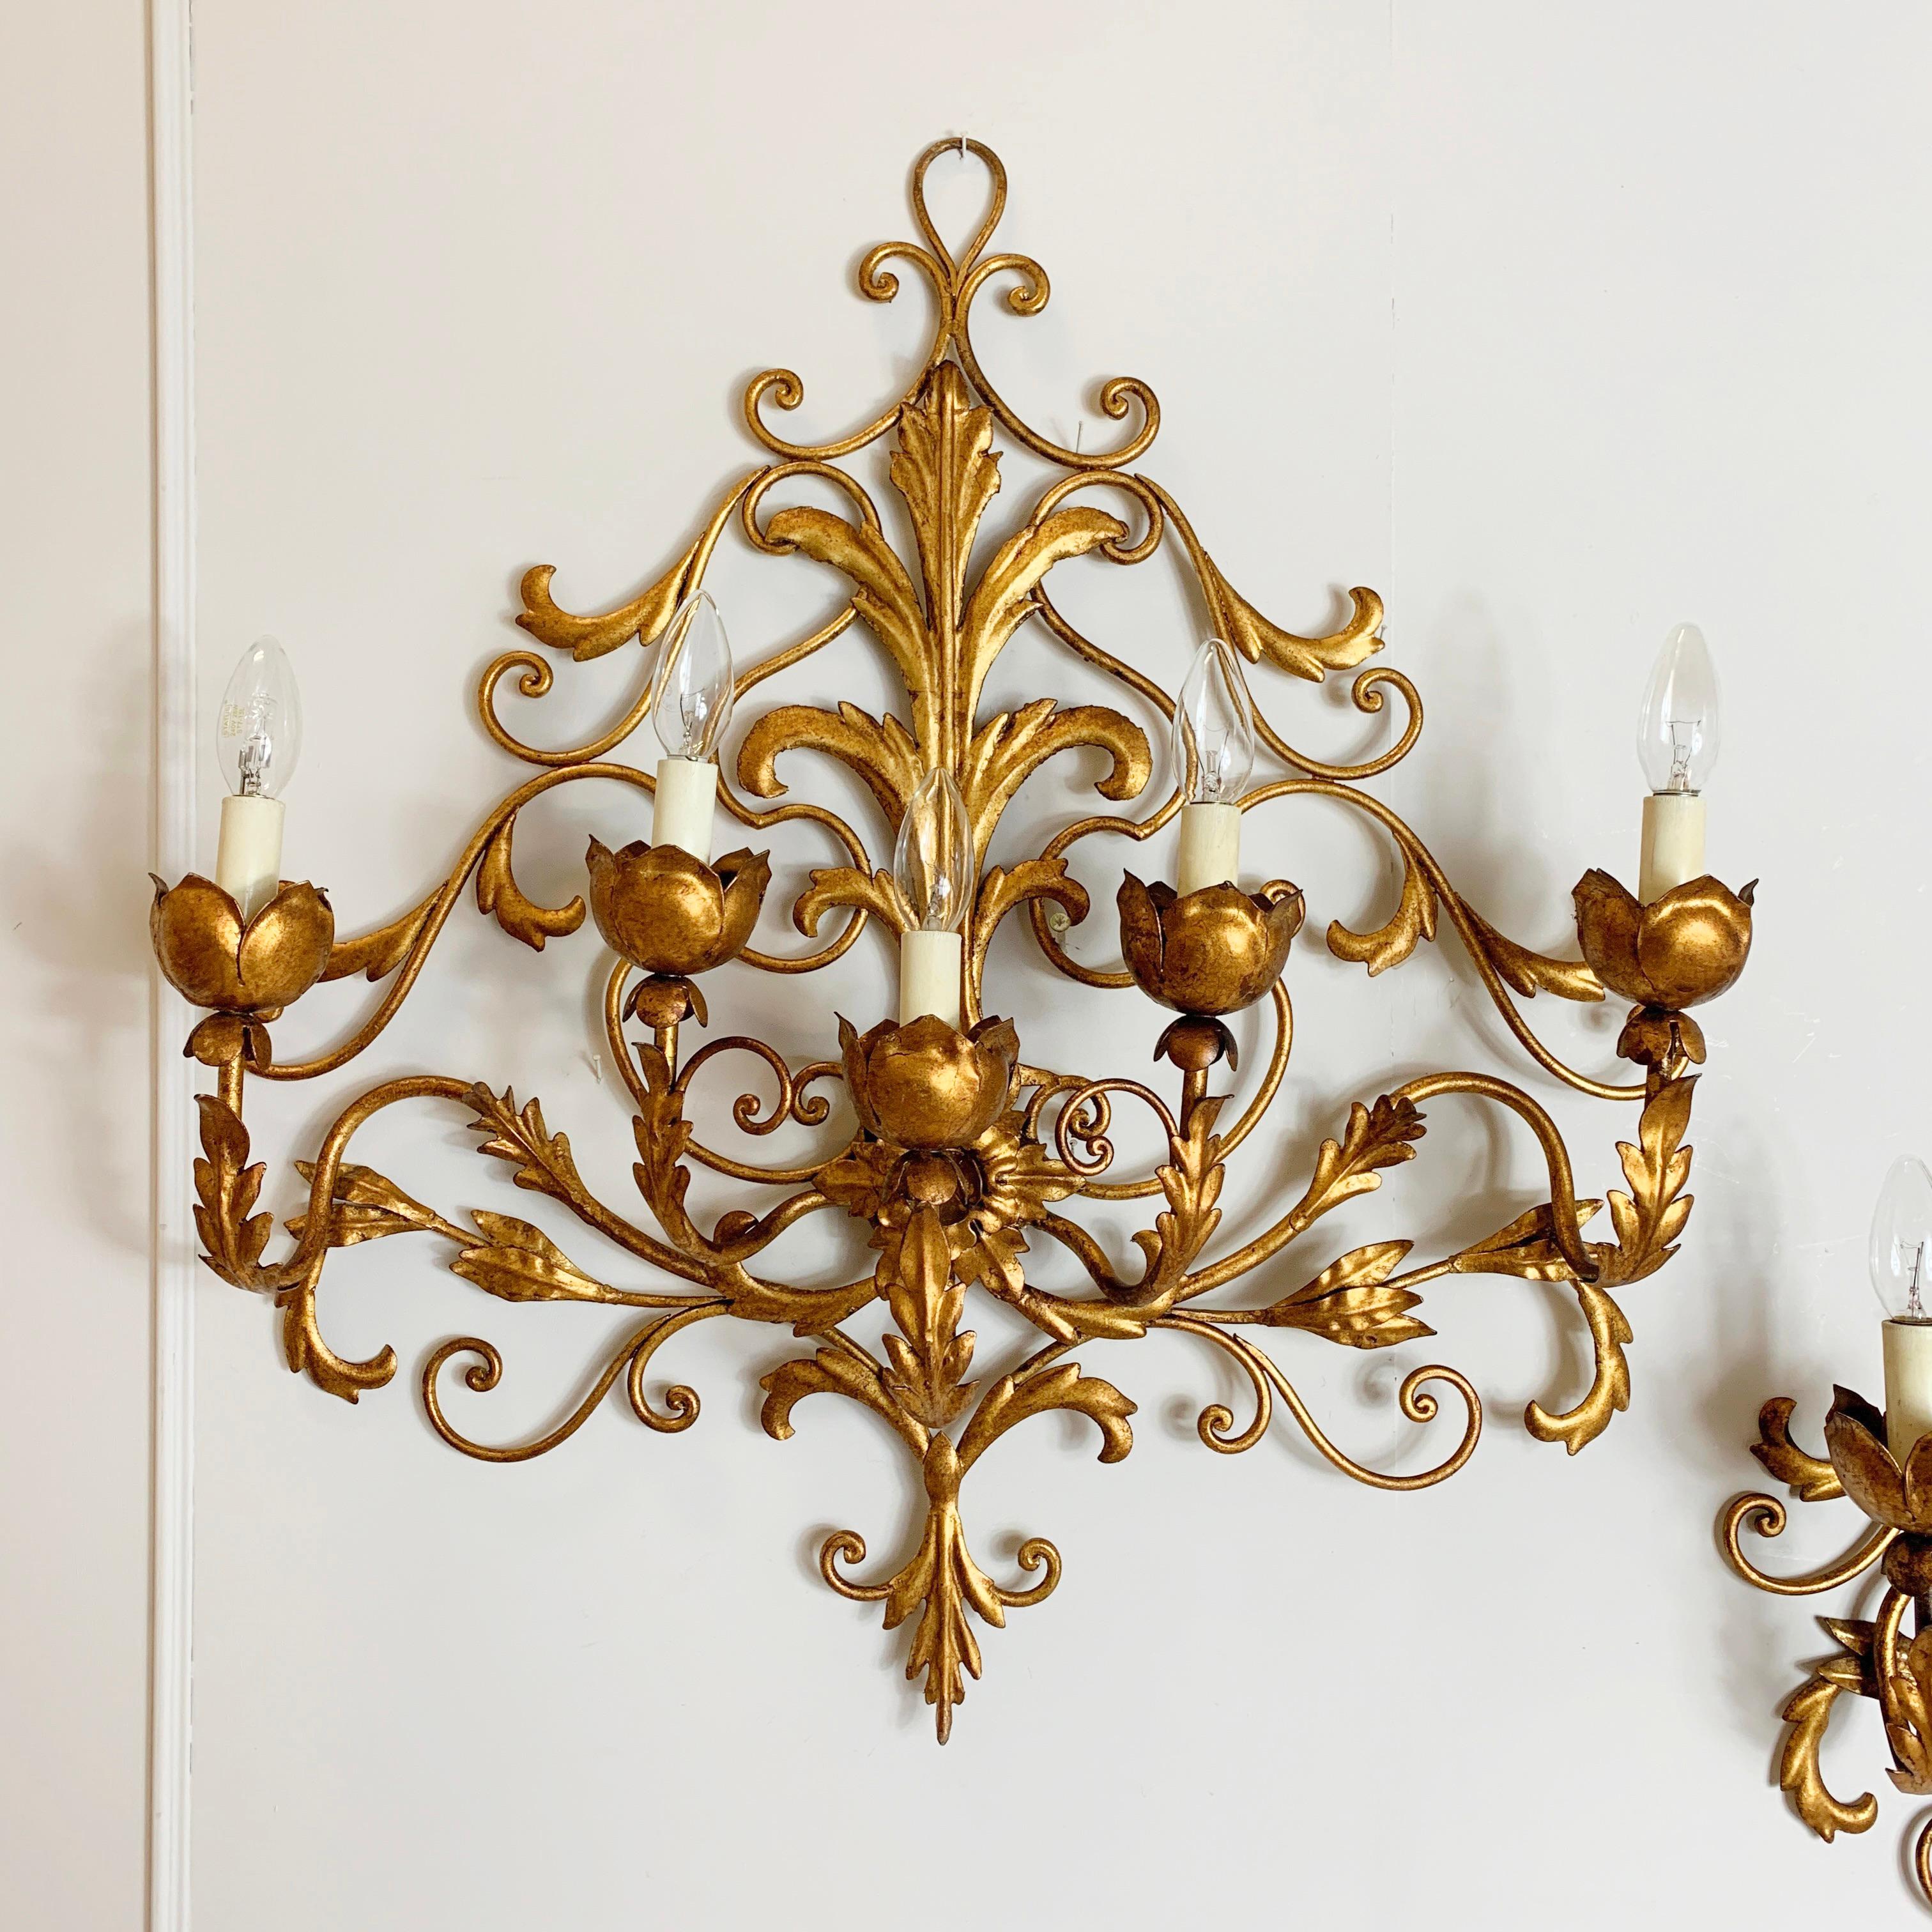 Pair of large Palladio wall sconce's, Italy, 1960s
Beautiful gilt Florentine wall lights with gilt metal acanthus leaf and scroll detailing
There are 5 lampholders to each light, e14 bulbs
These lights are an impressive statement on any